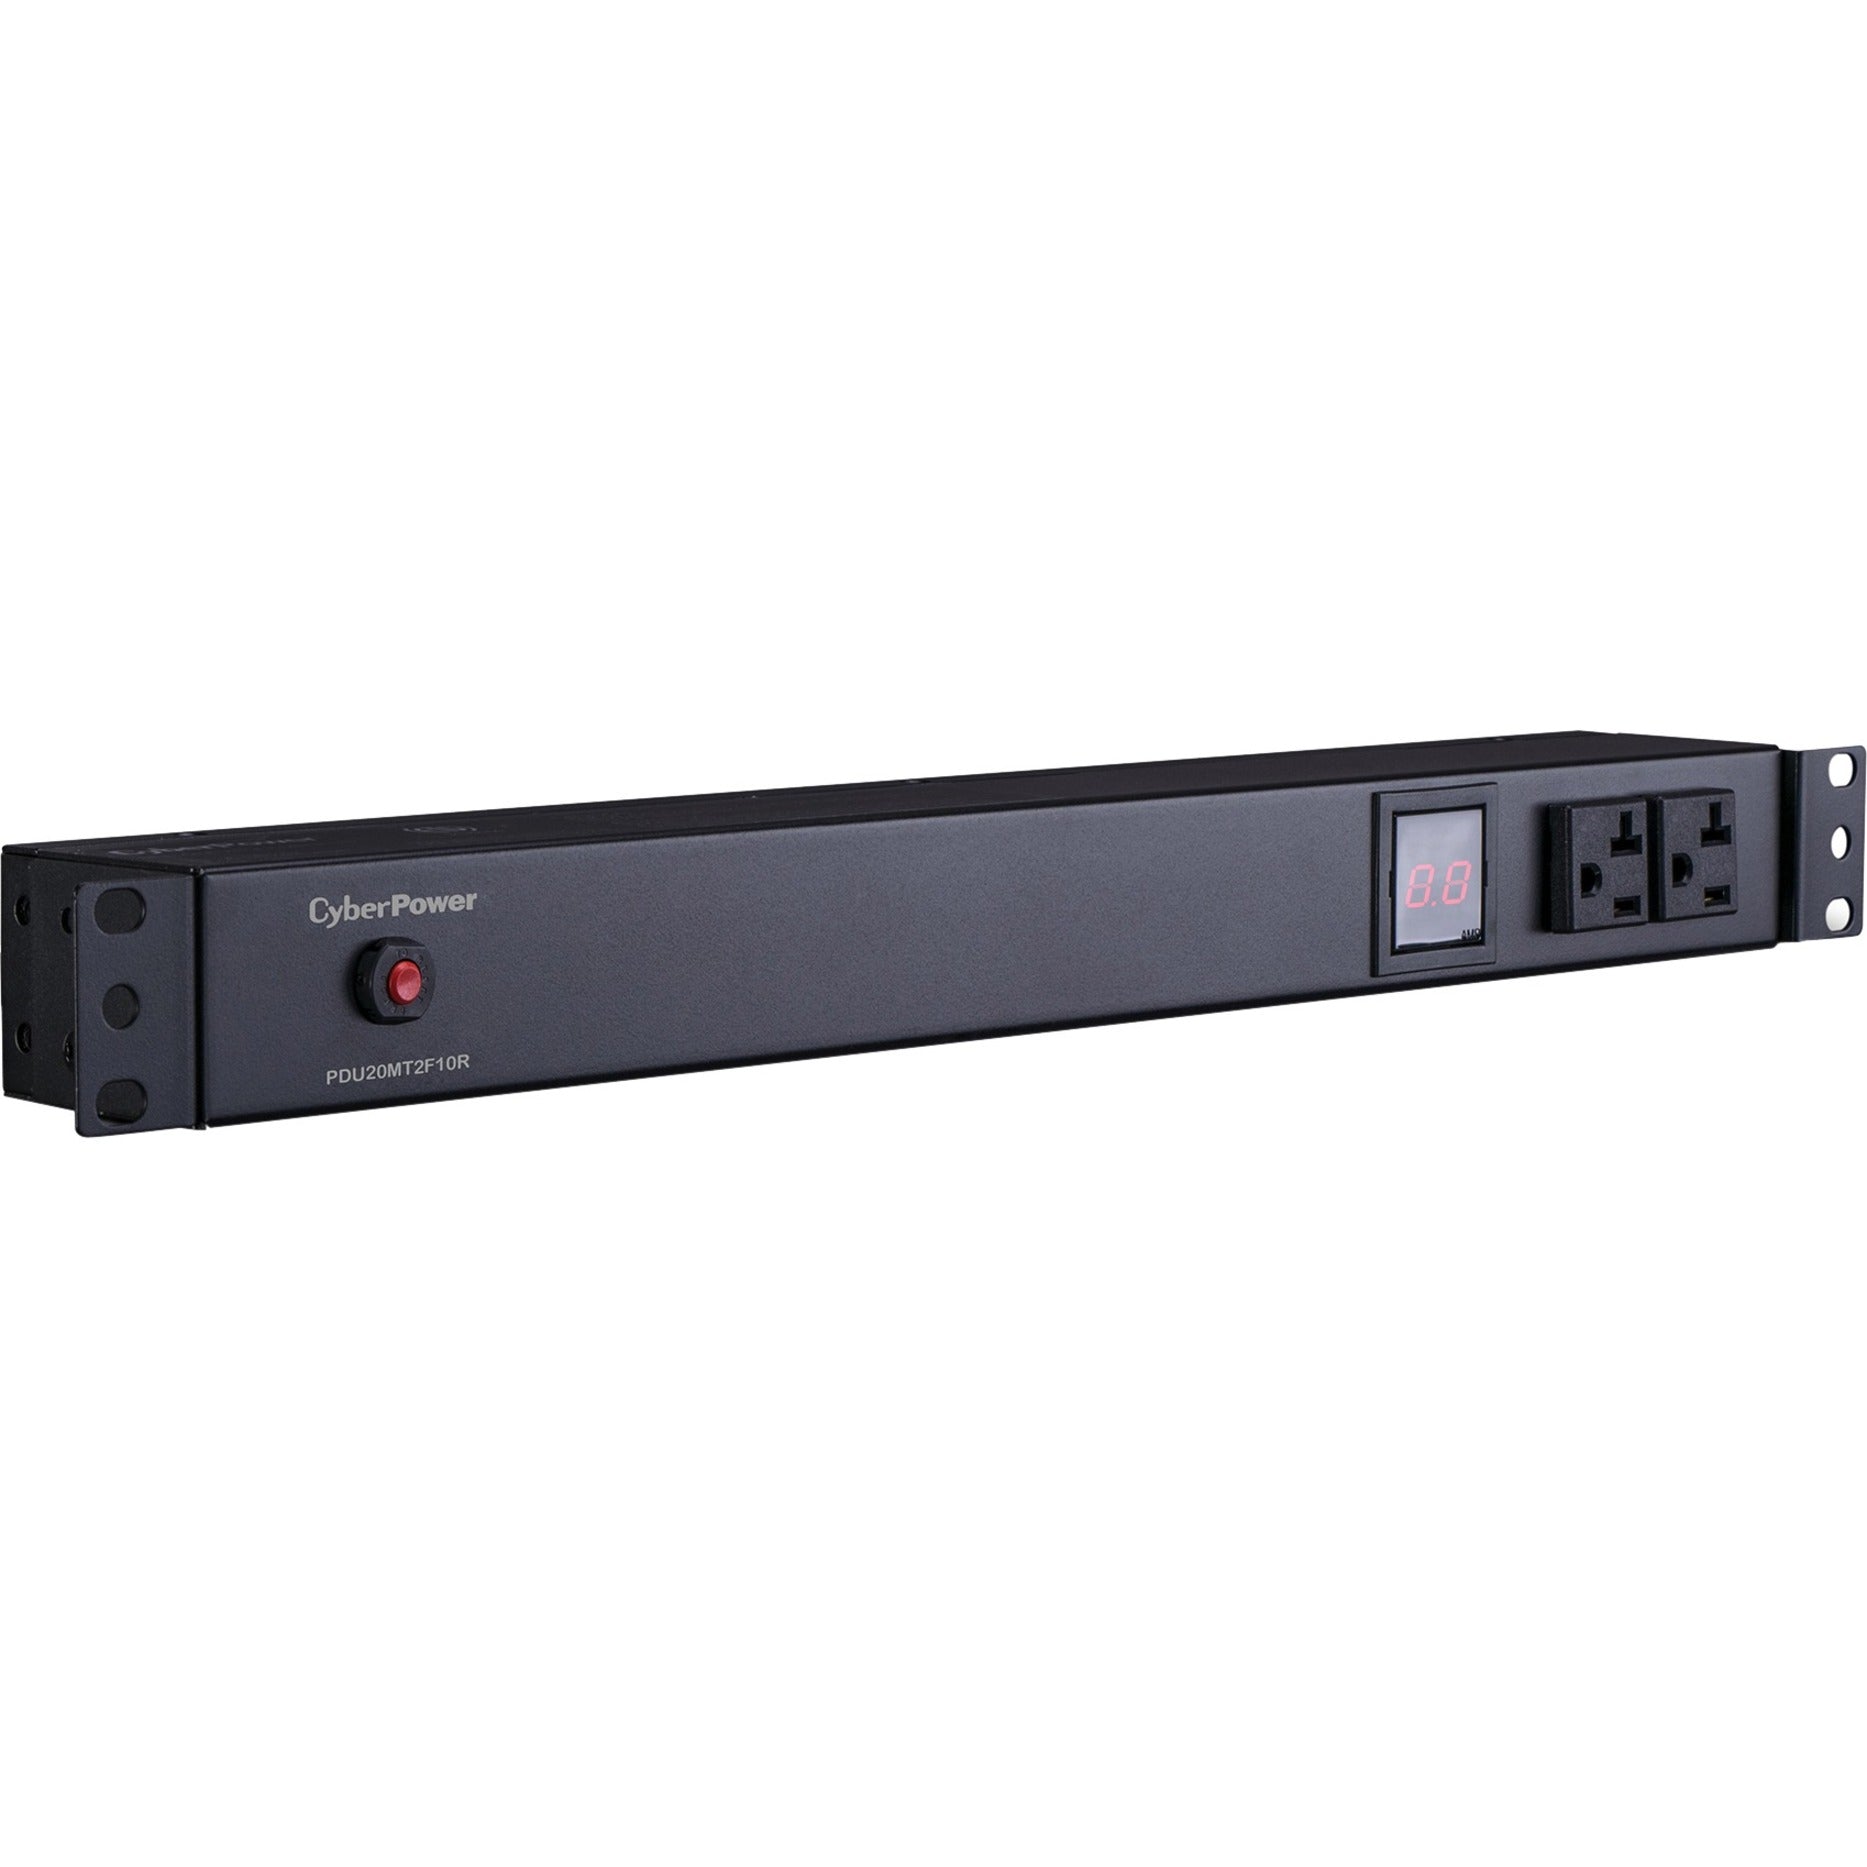 CyberPower PDU20MT2F10R Metered PDU, 12-Outlets, 20A, 120V AC, Rack-mountable